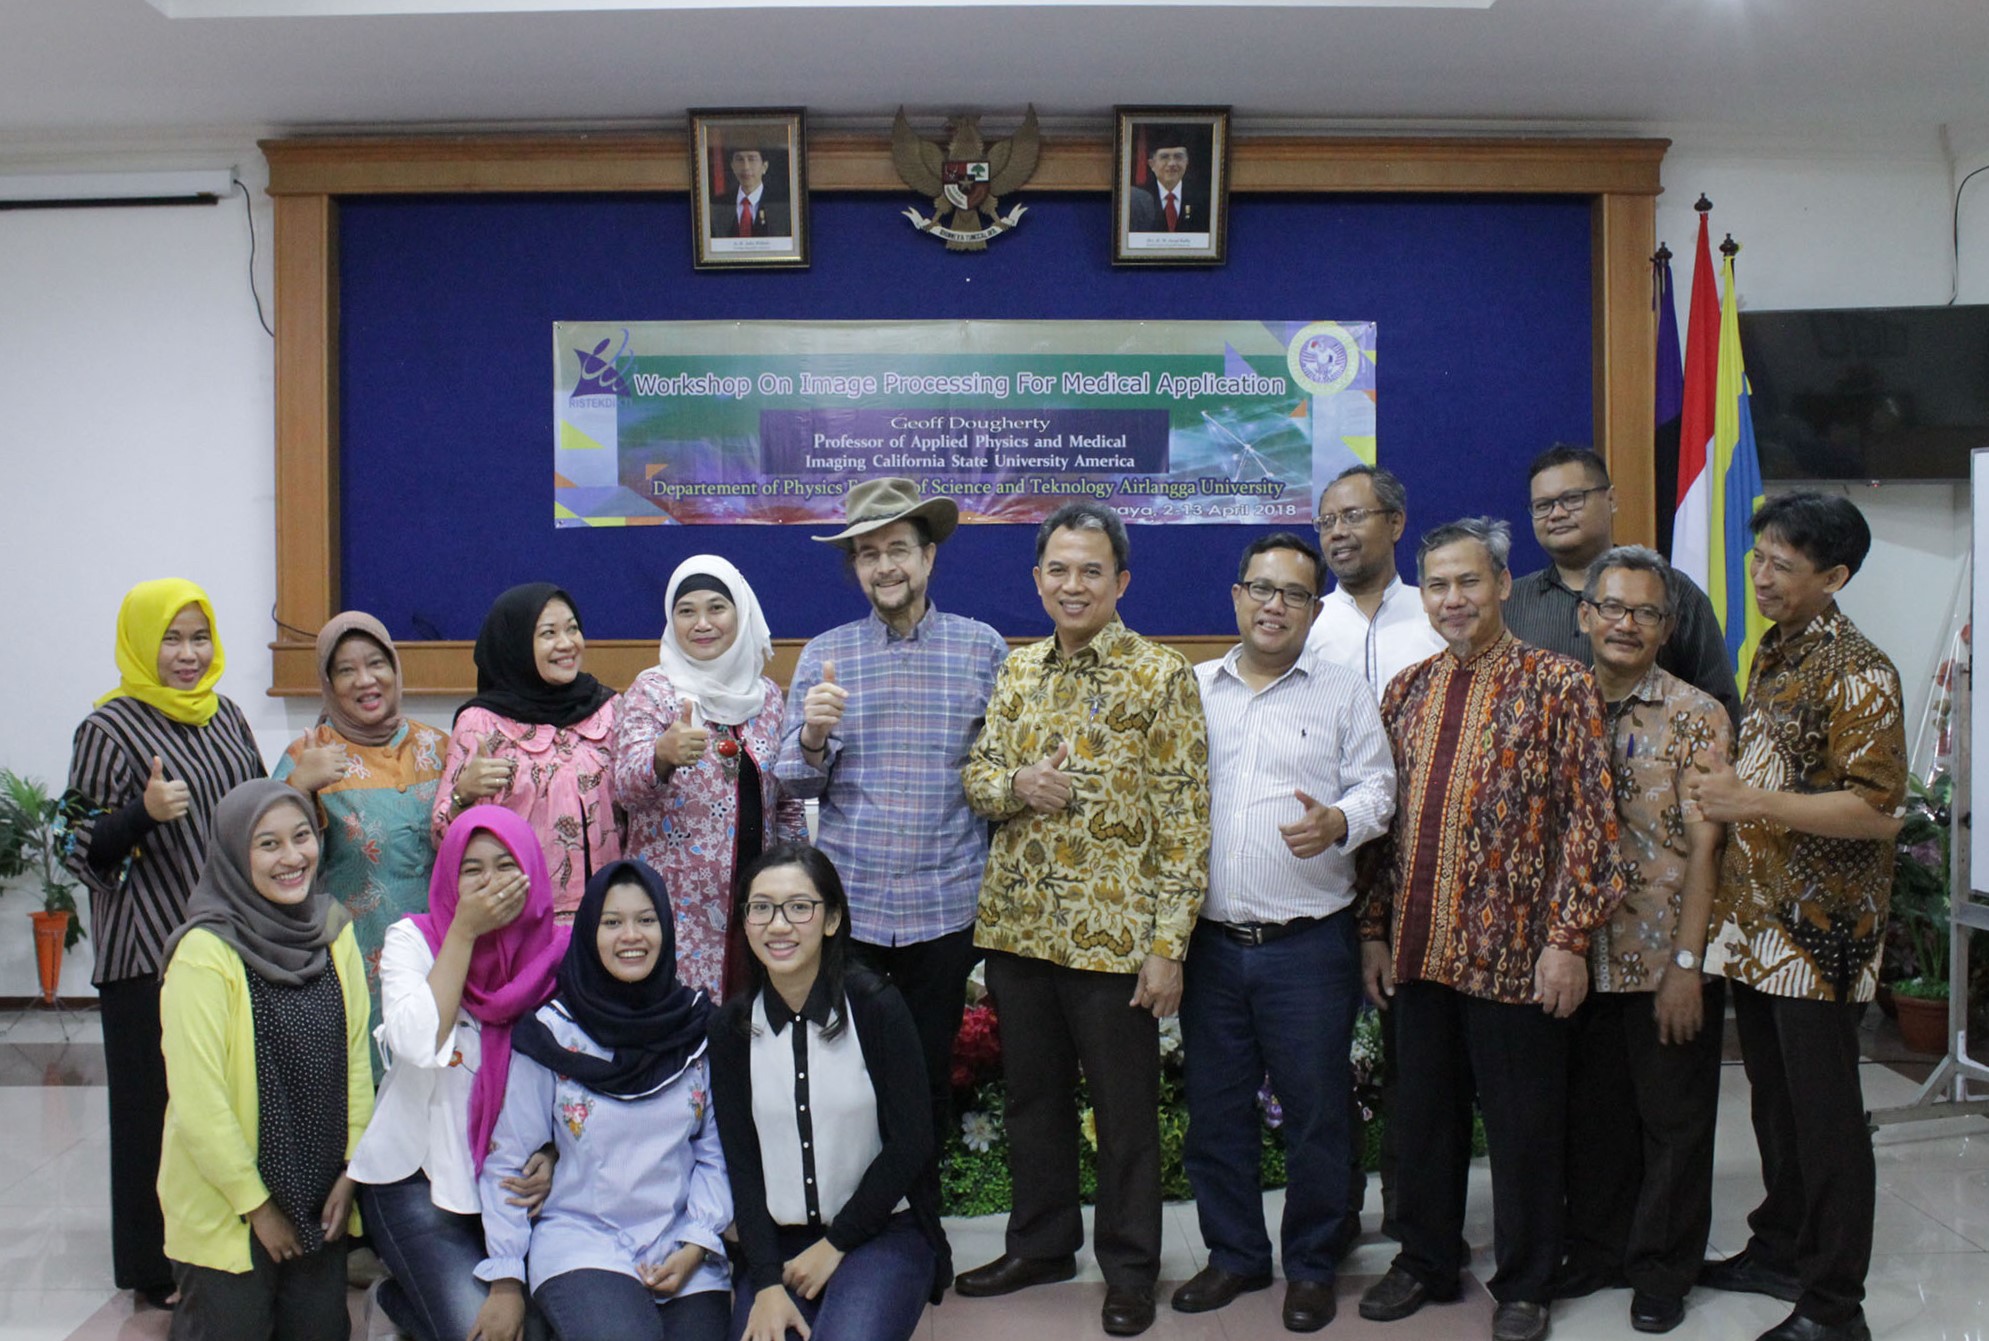 An American college professor posing with Indonesian men, and women wearing hijabs